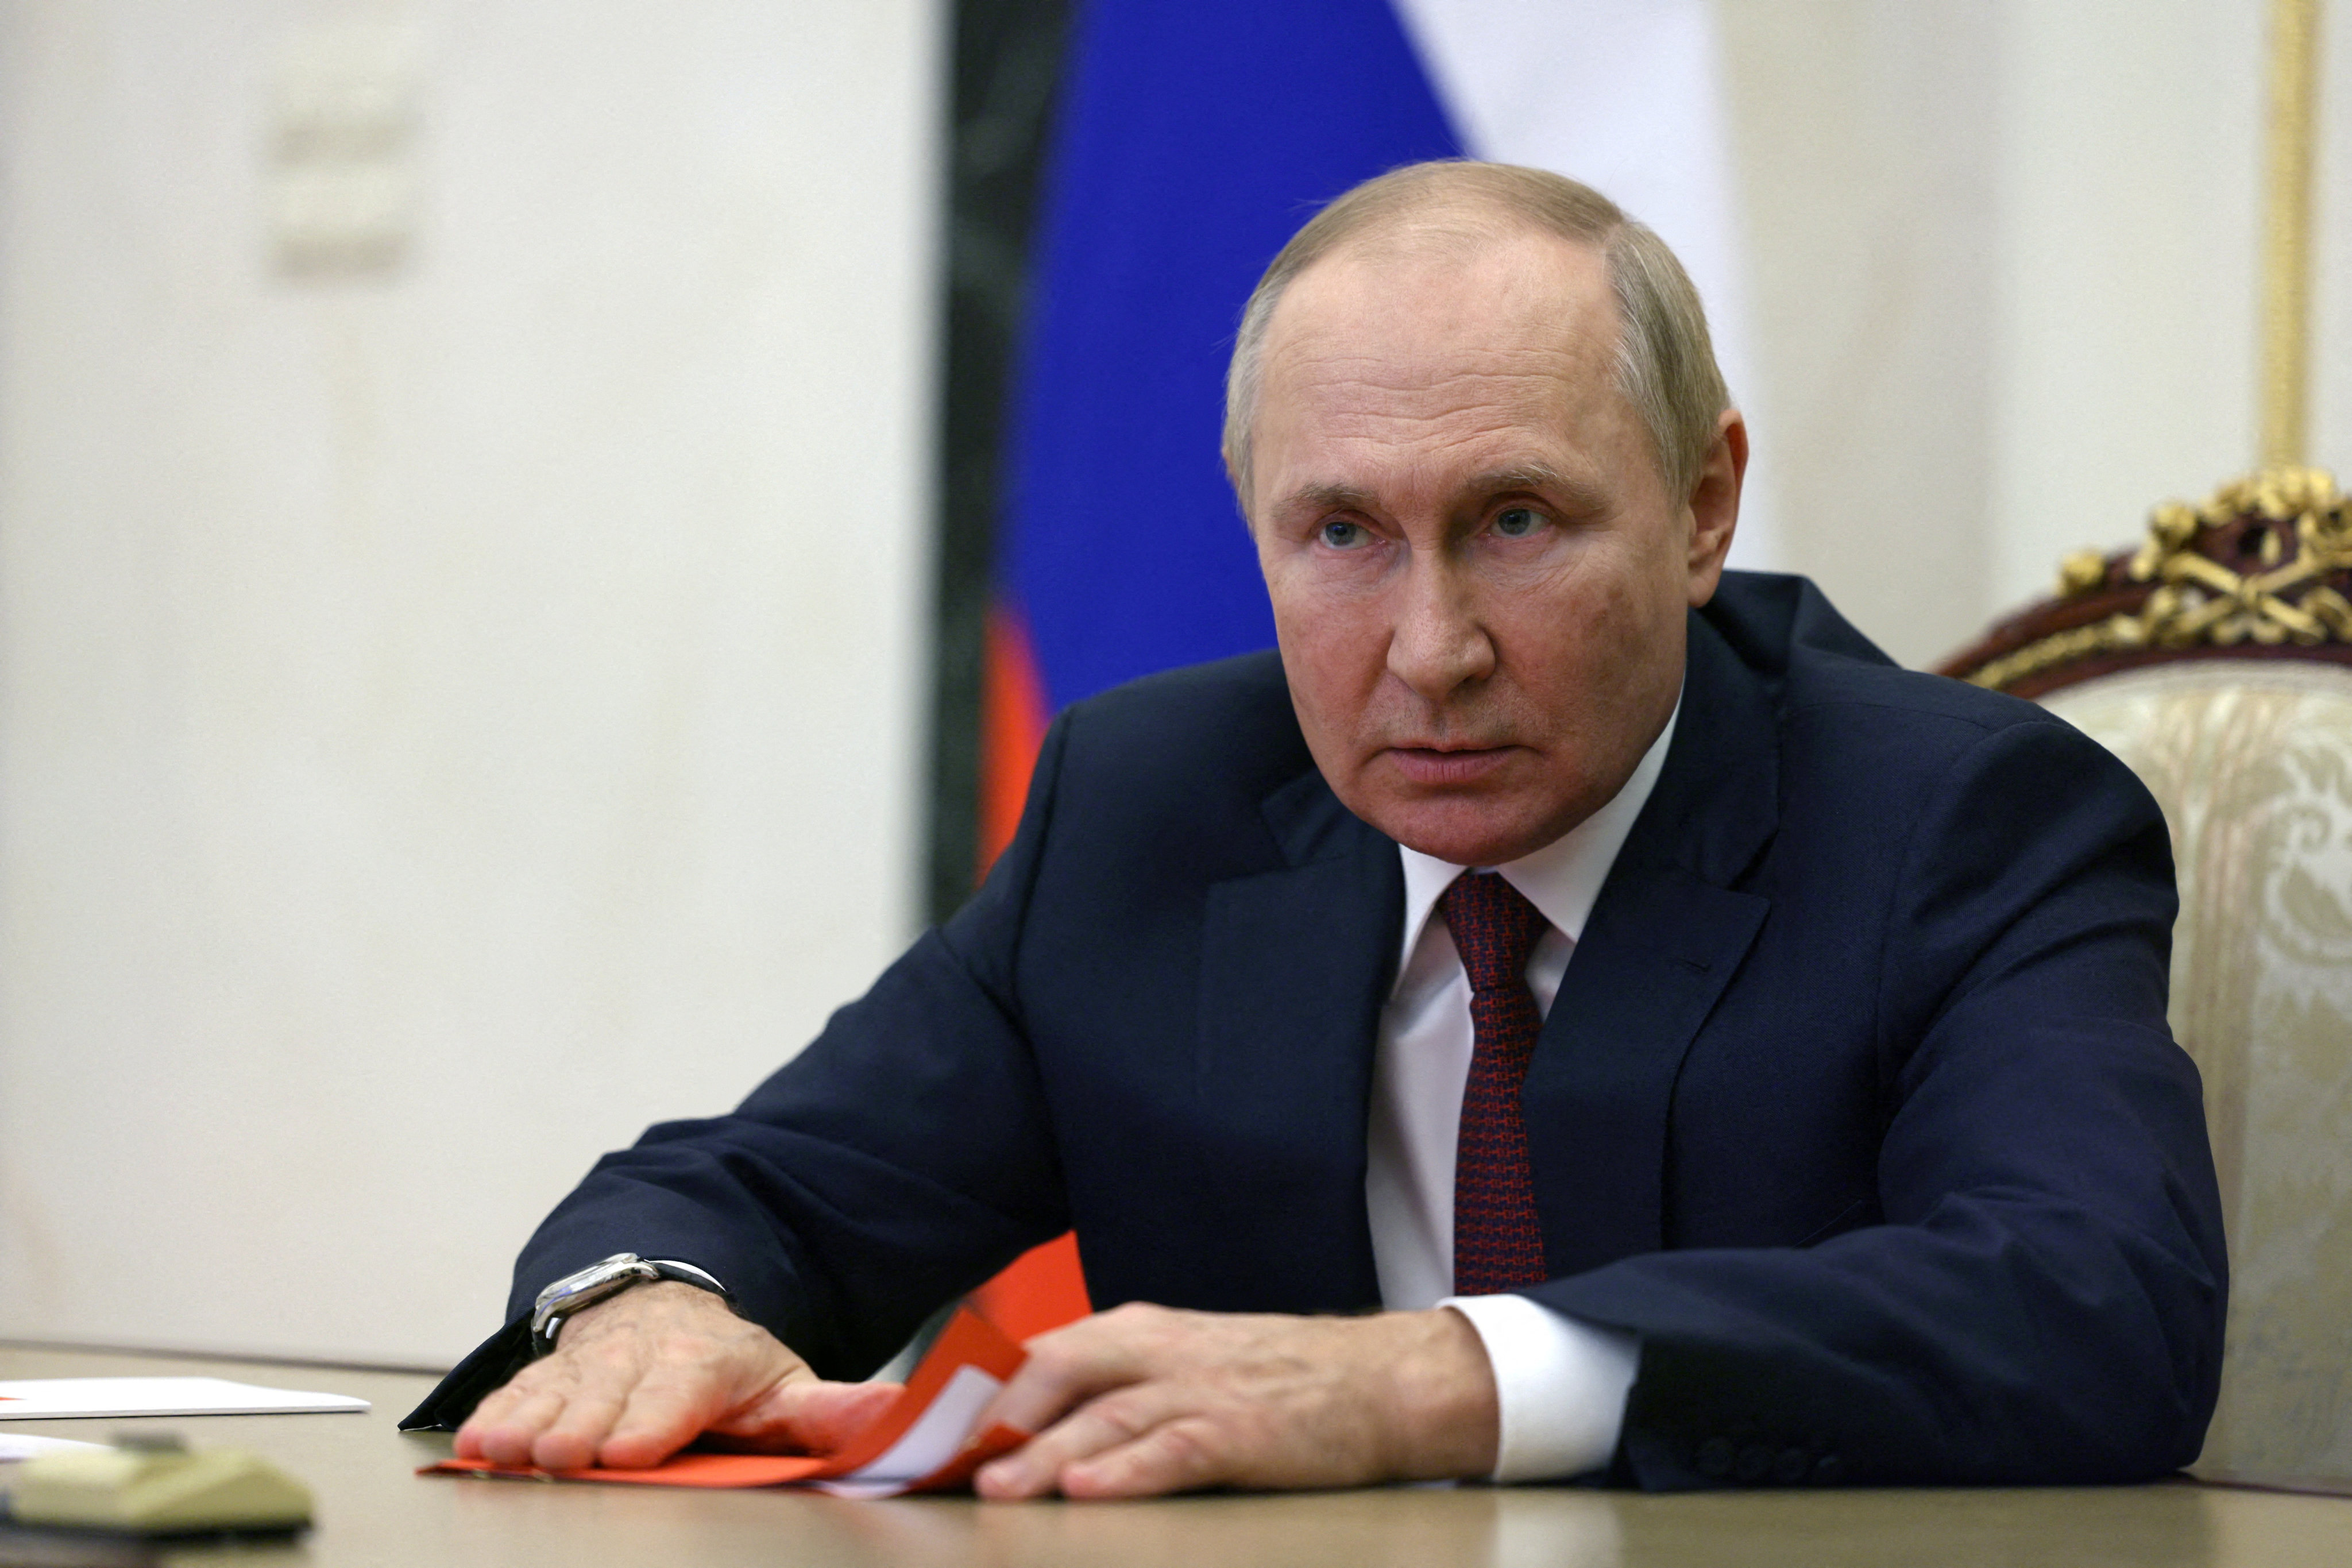 Russian President Vladimir Putin attends a meeting with members of the Security Council via a video link in Moscow, Russia, September 29, 2022. Photo: Reuters